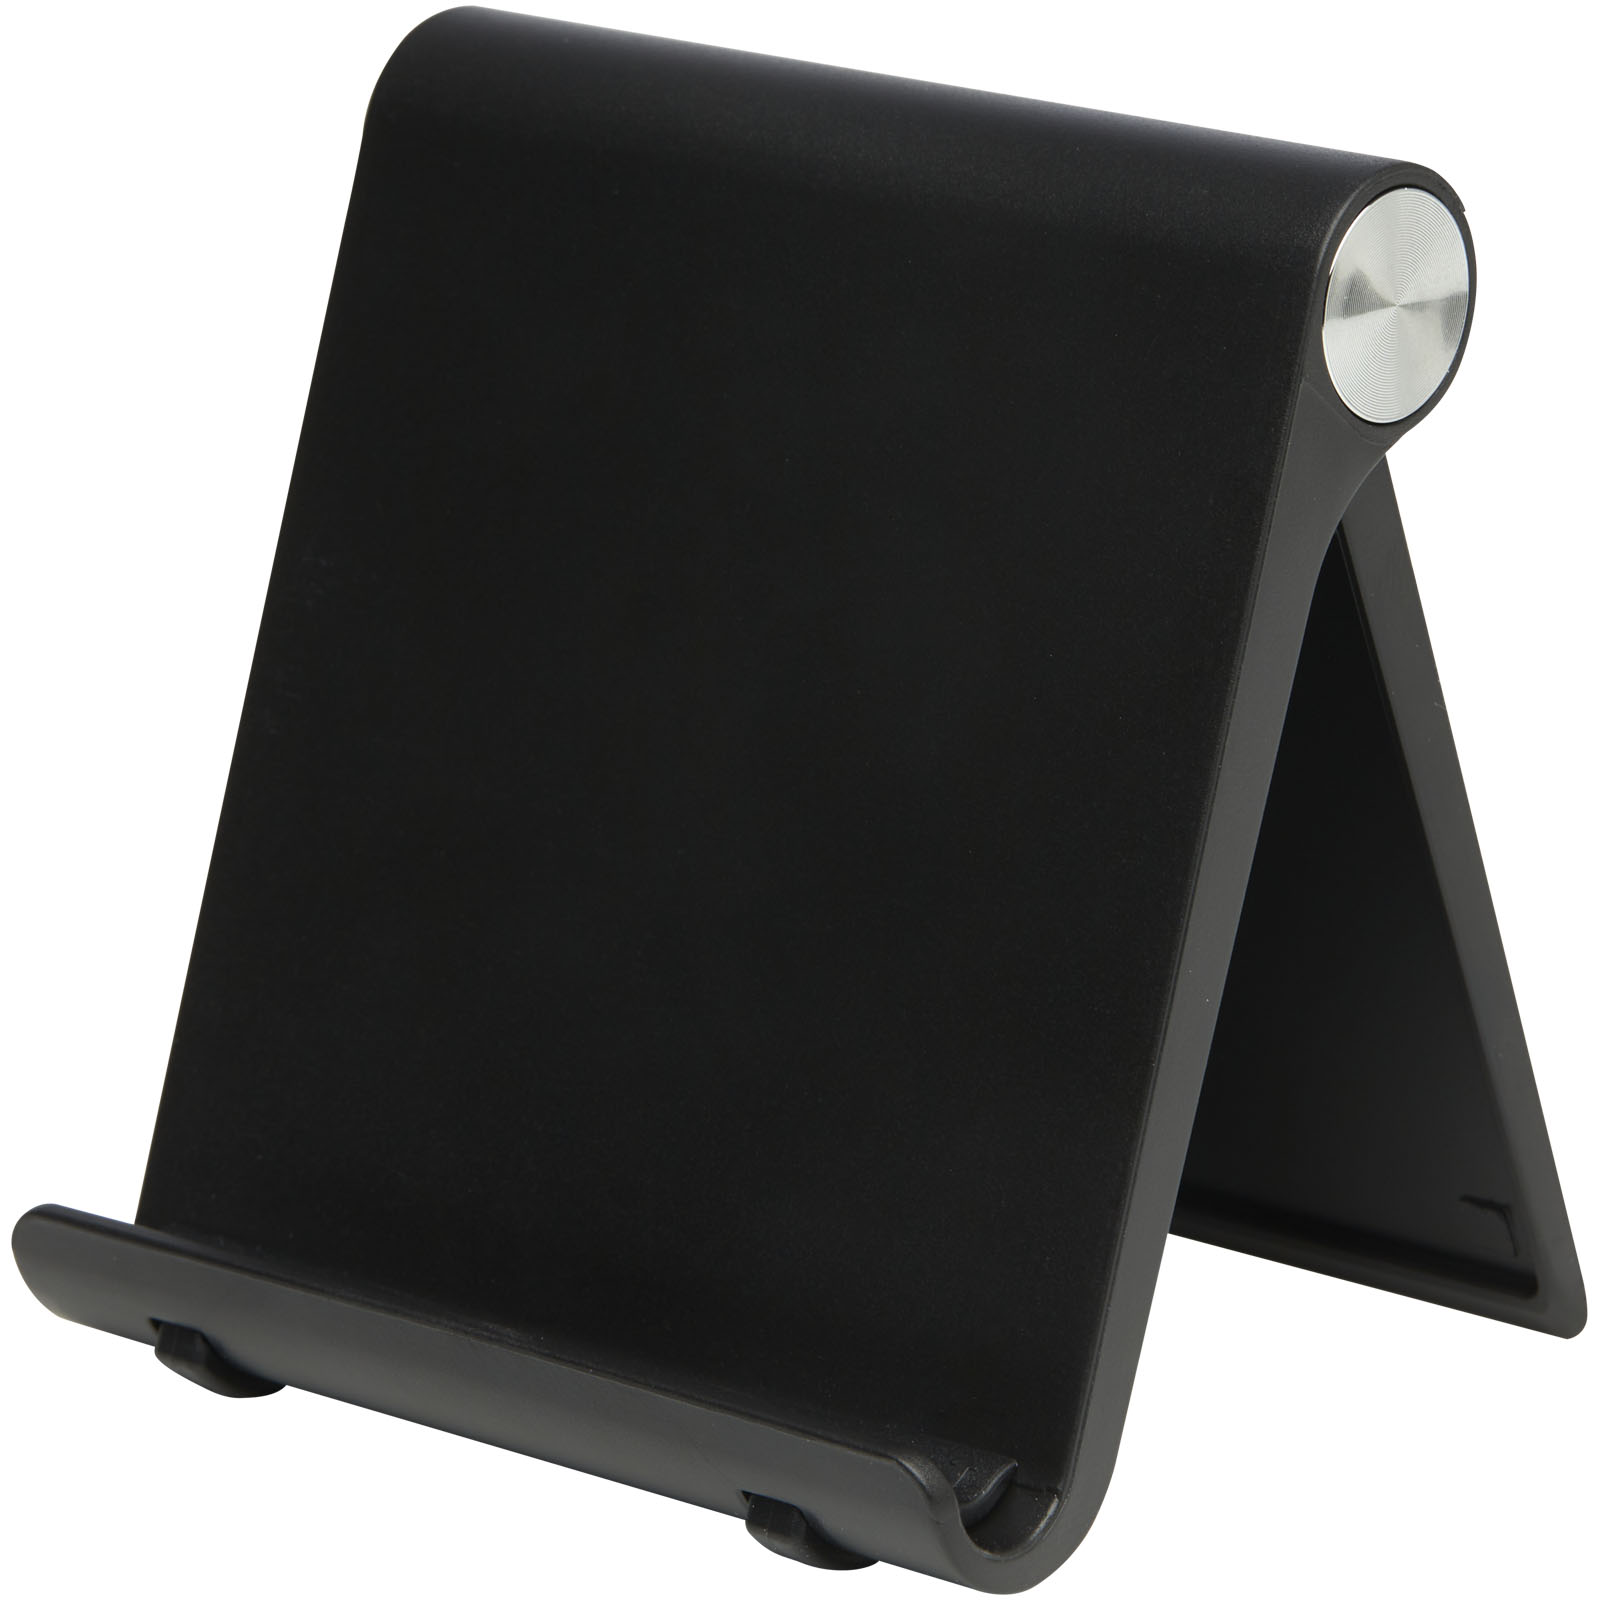 Advertising Stands & Holders - Resty phone and tablet stand - 4